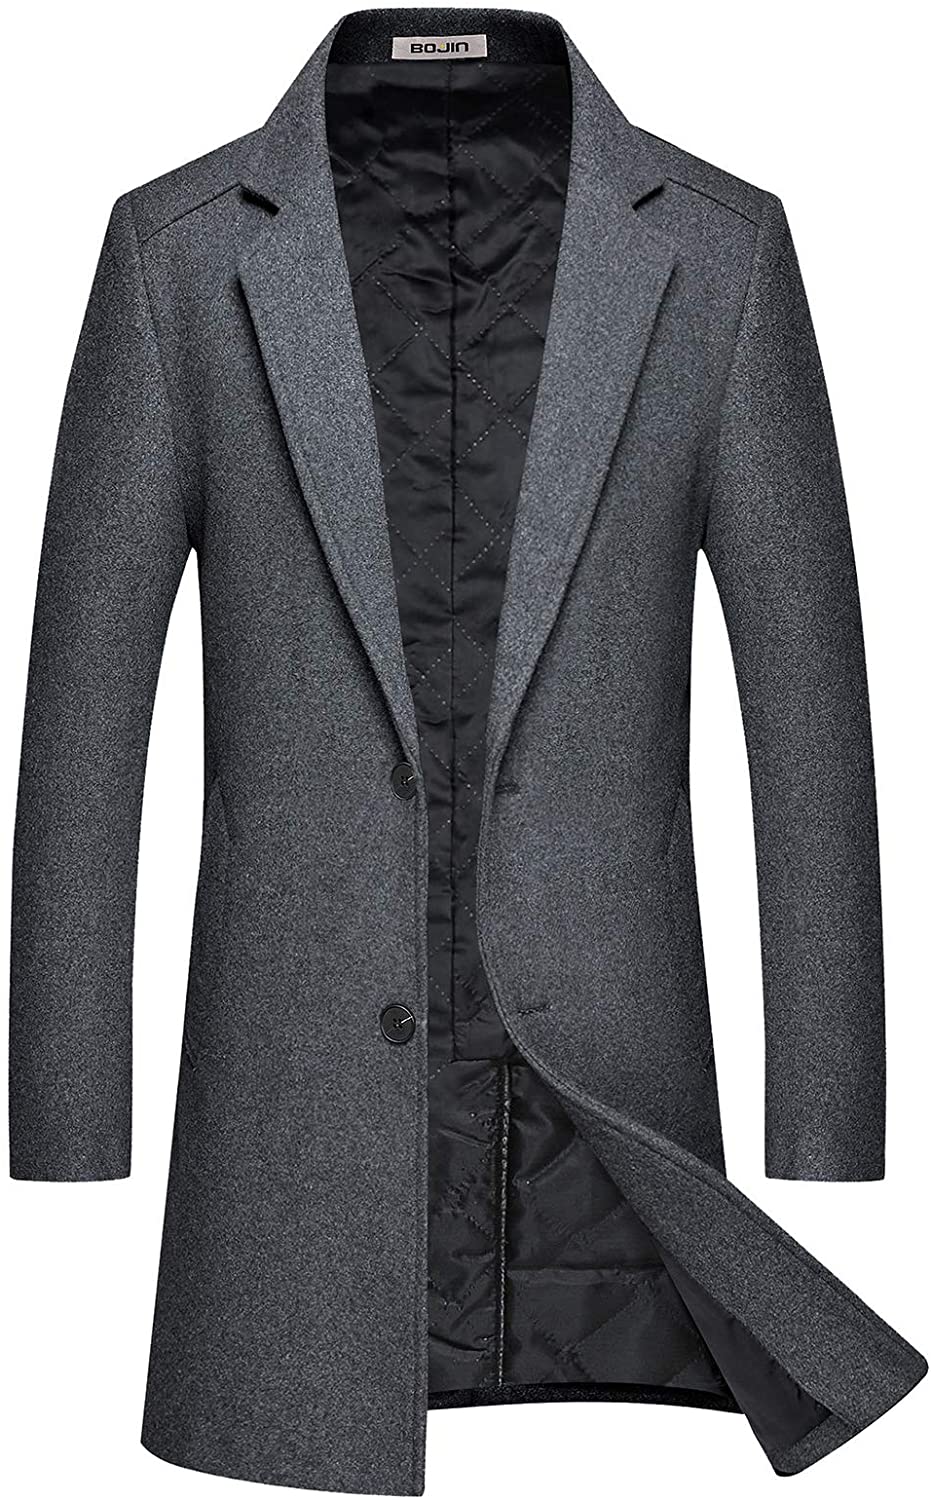 Mens Trench Coat Wool Blend Top Pea Coat Winter Long, A03 Gray, Size ...